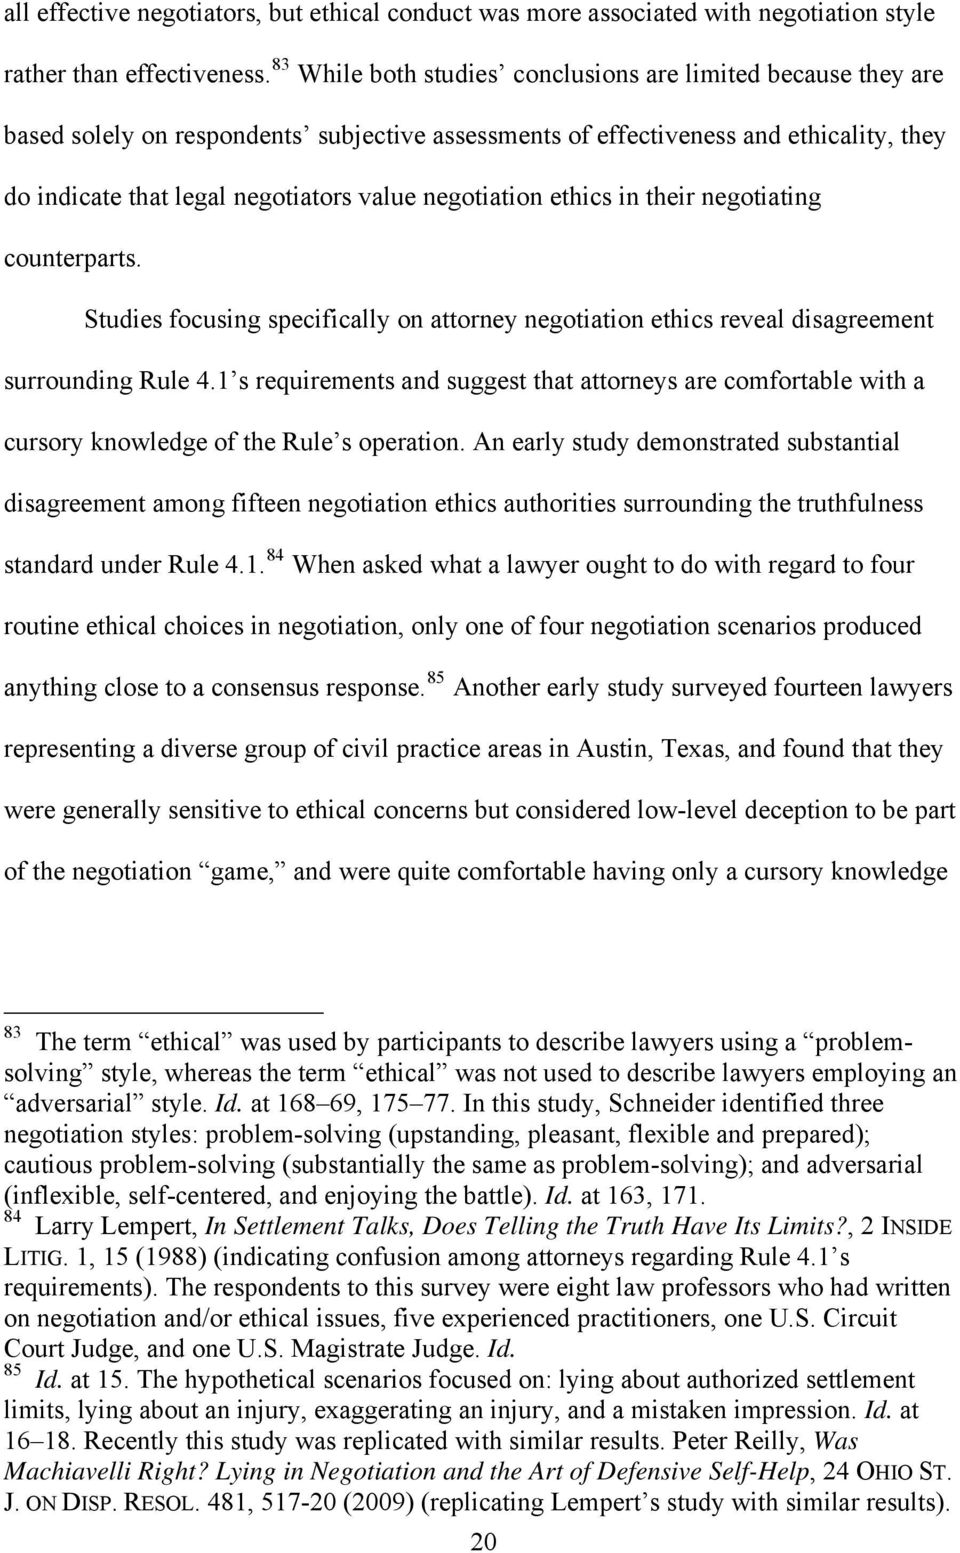 negotiation ethics in their negotiating counterparts. Studies focusing specifically on attorney negotiation ethics reveal disagreement surrounding Rule 4.